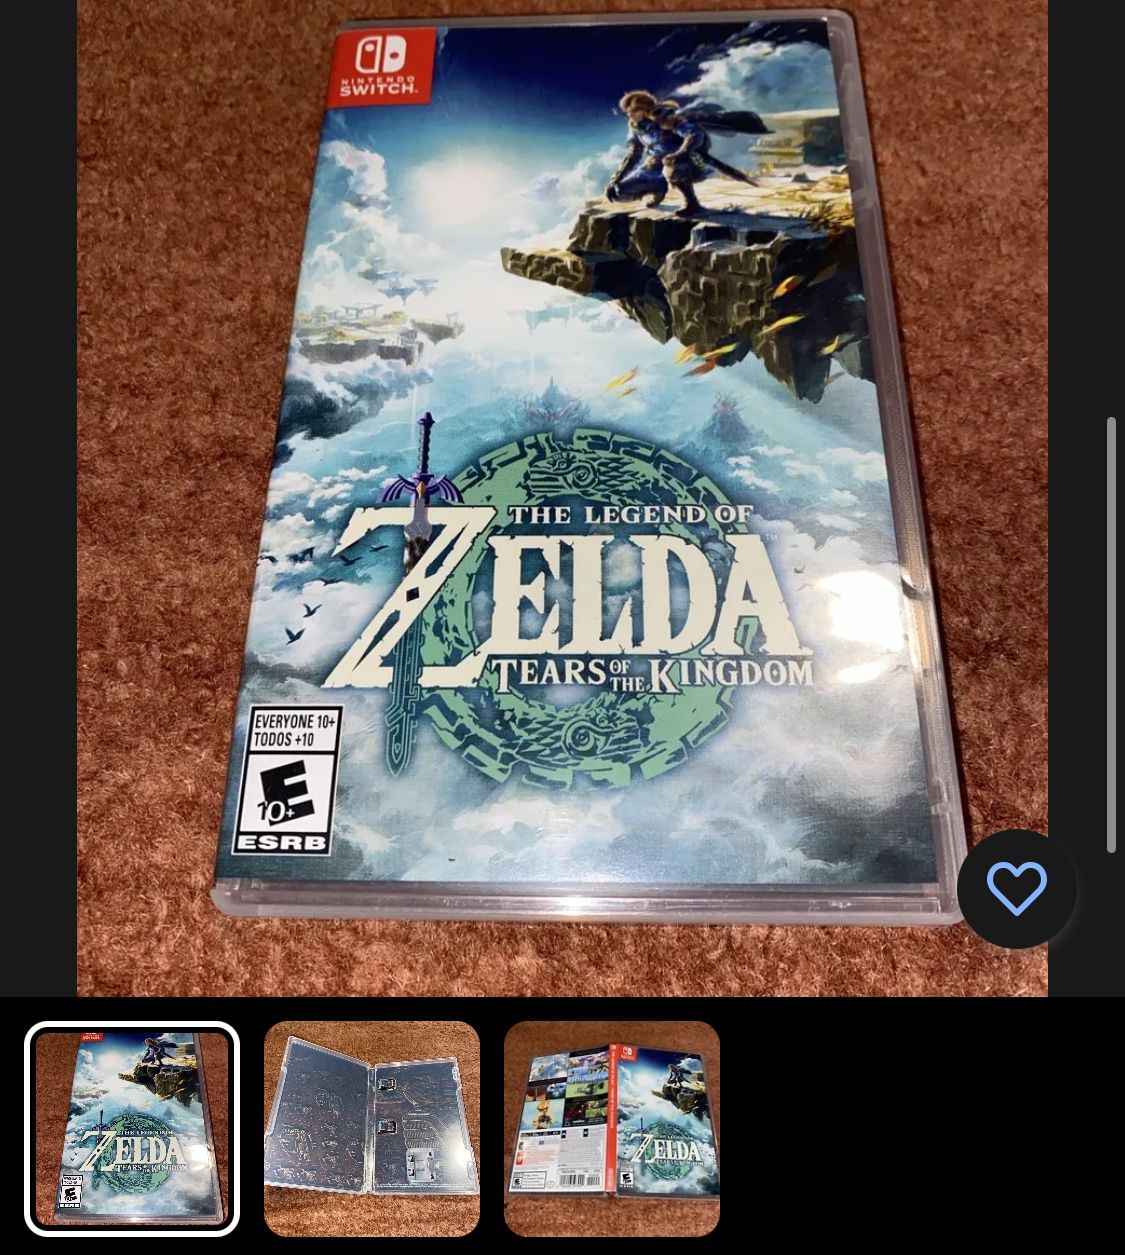 The Legend of Zelda Tears of the Kingdom - Nintendo Switch CASE ONLY NO GAME